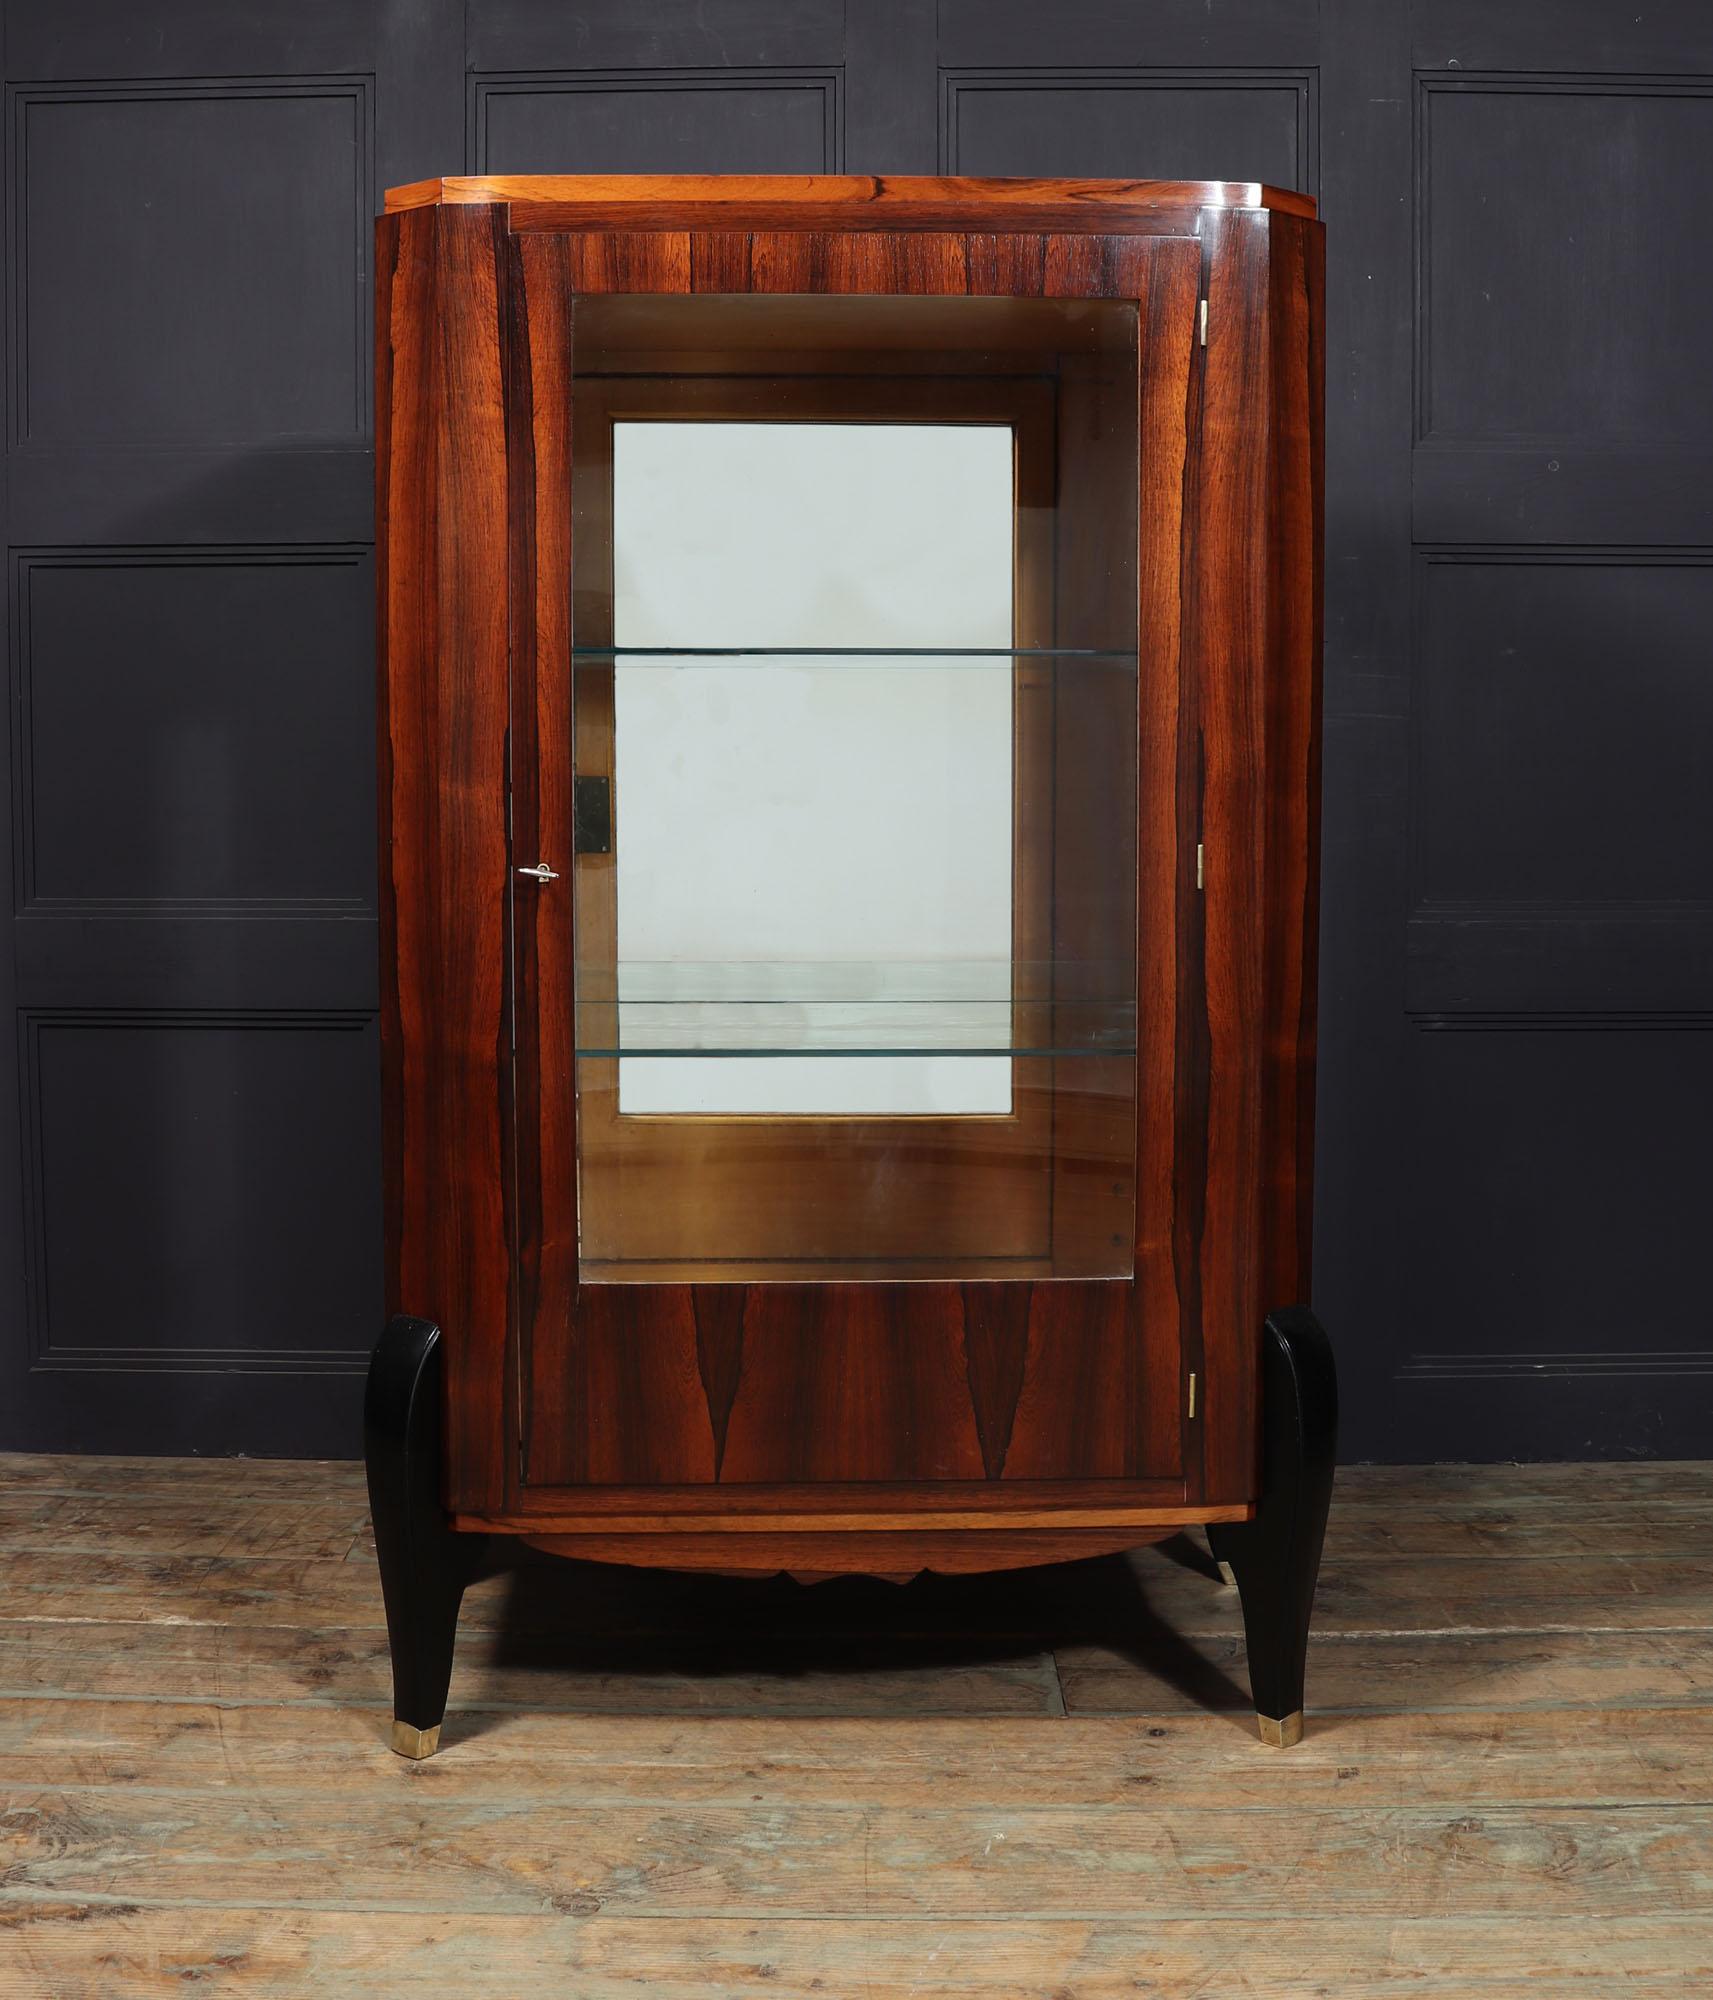 ART DECO DISPLAY CABINET IN ROSEWOOD
A French Art Deco display cabinet in rosewood with canted corners and sting on ebonies oak sabre legs with heavy cast bronze sabots, the glazed door is lockable, it has glazing to each side and a mirrored back